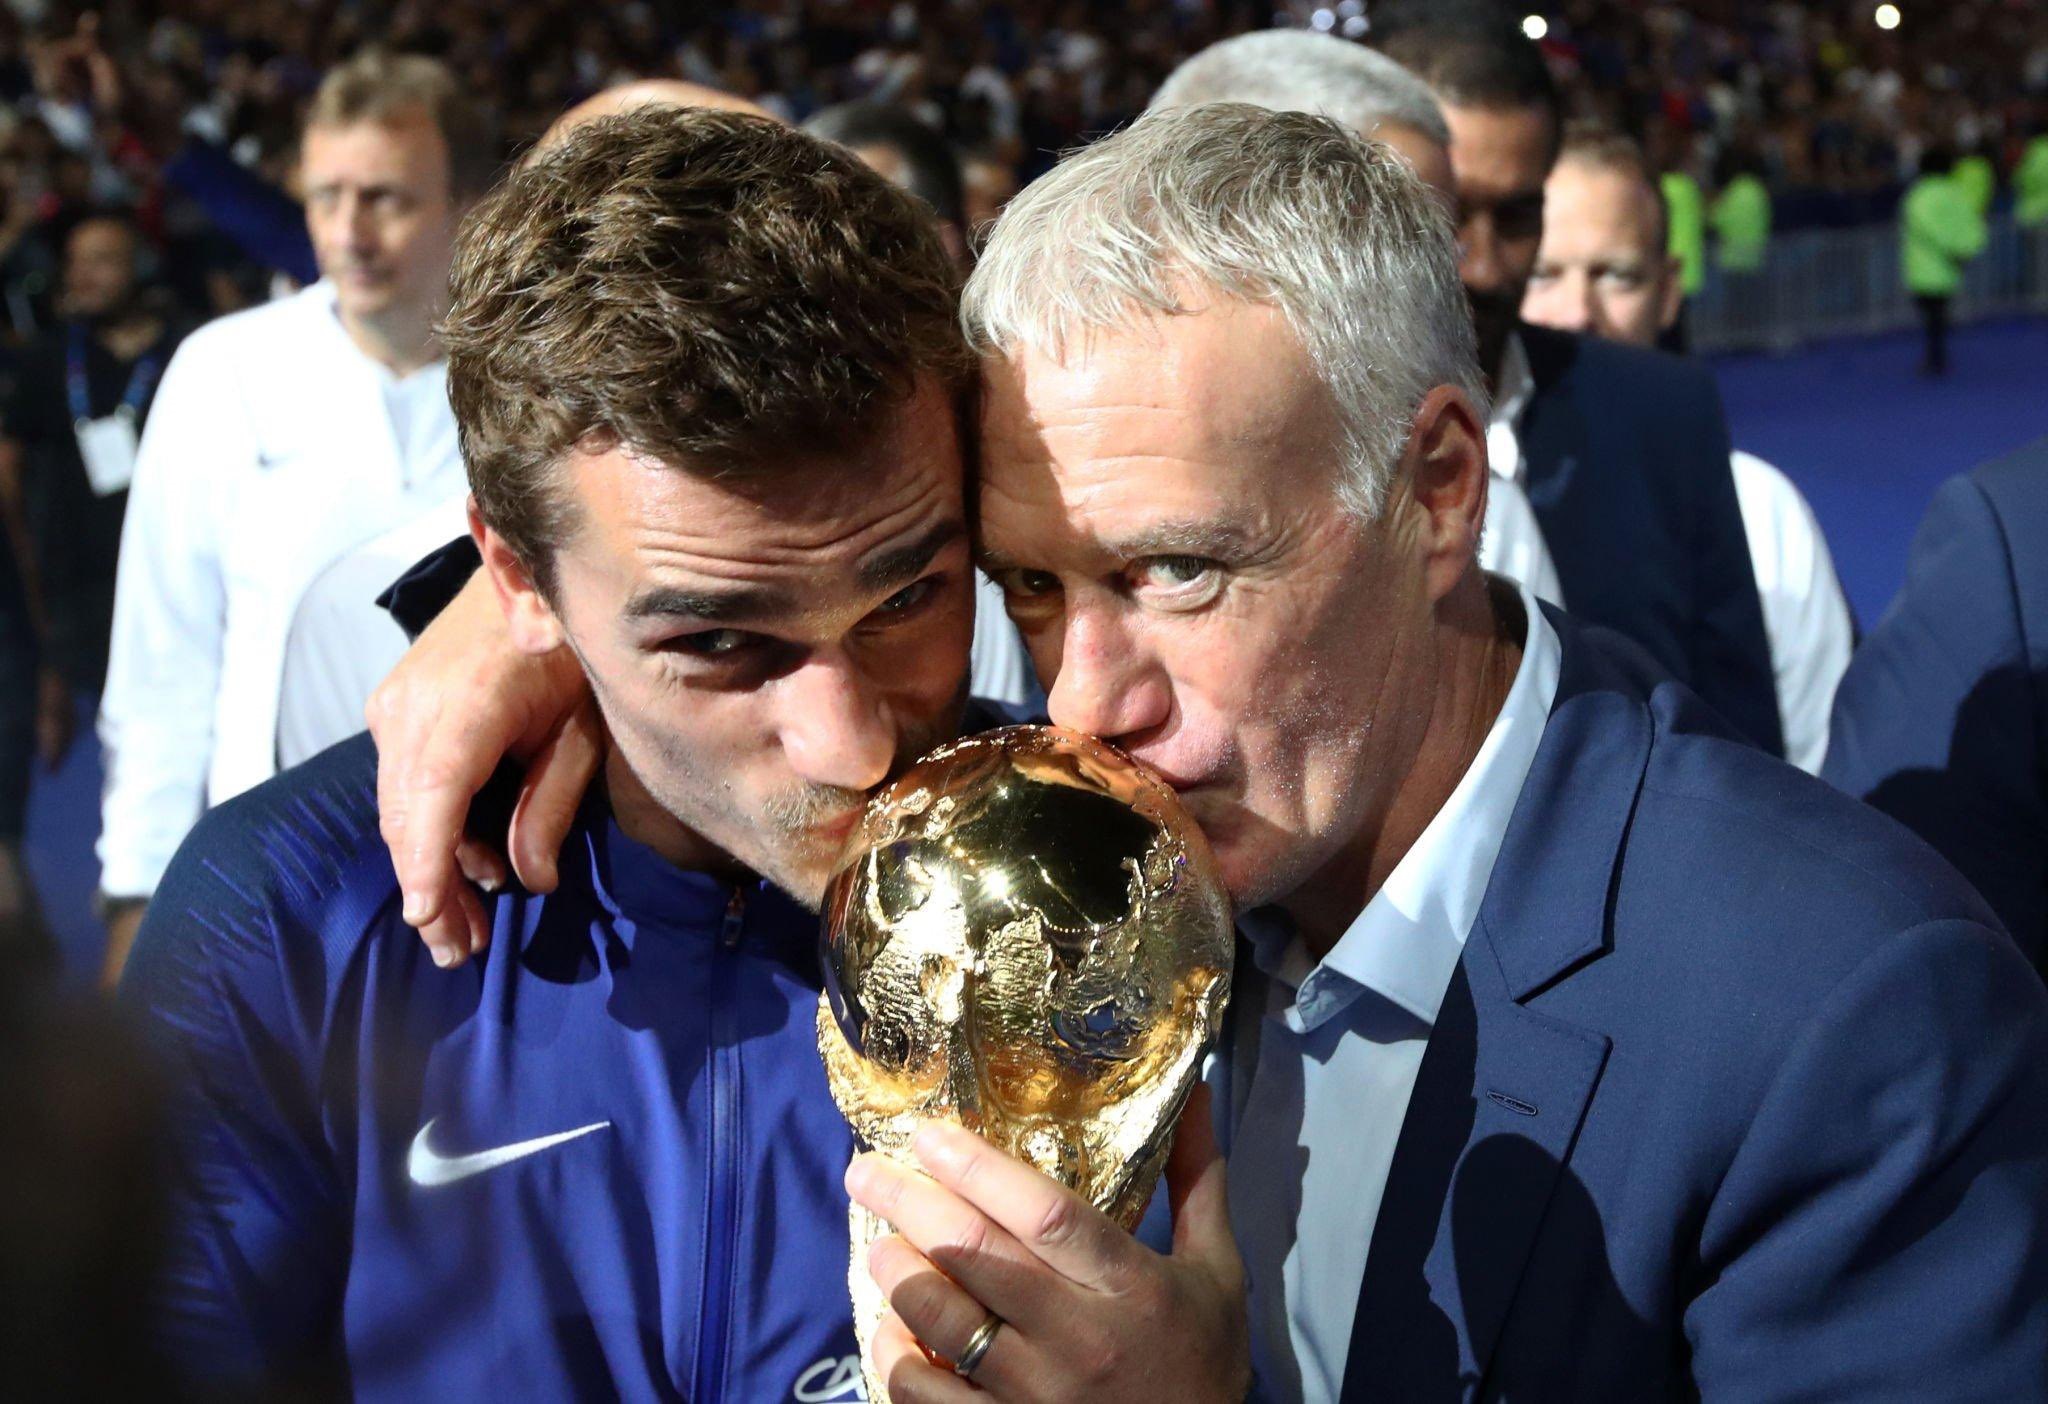 France’s coach attacks the Ballon d’Or and accuses voters of “betrayal of trust”